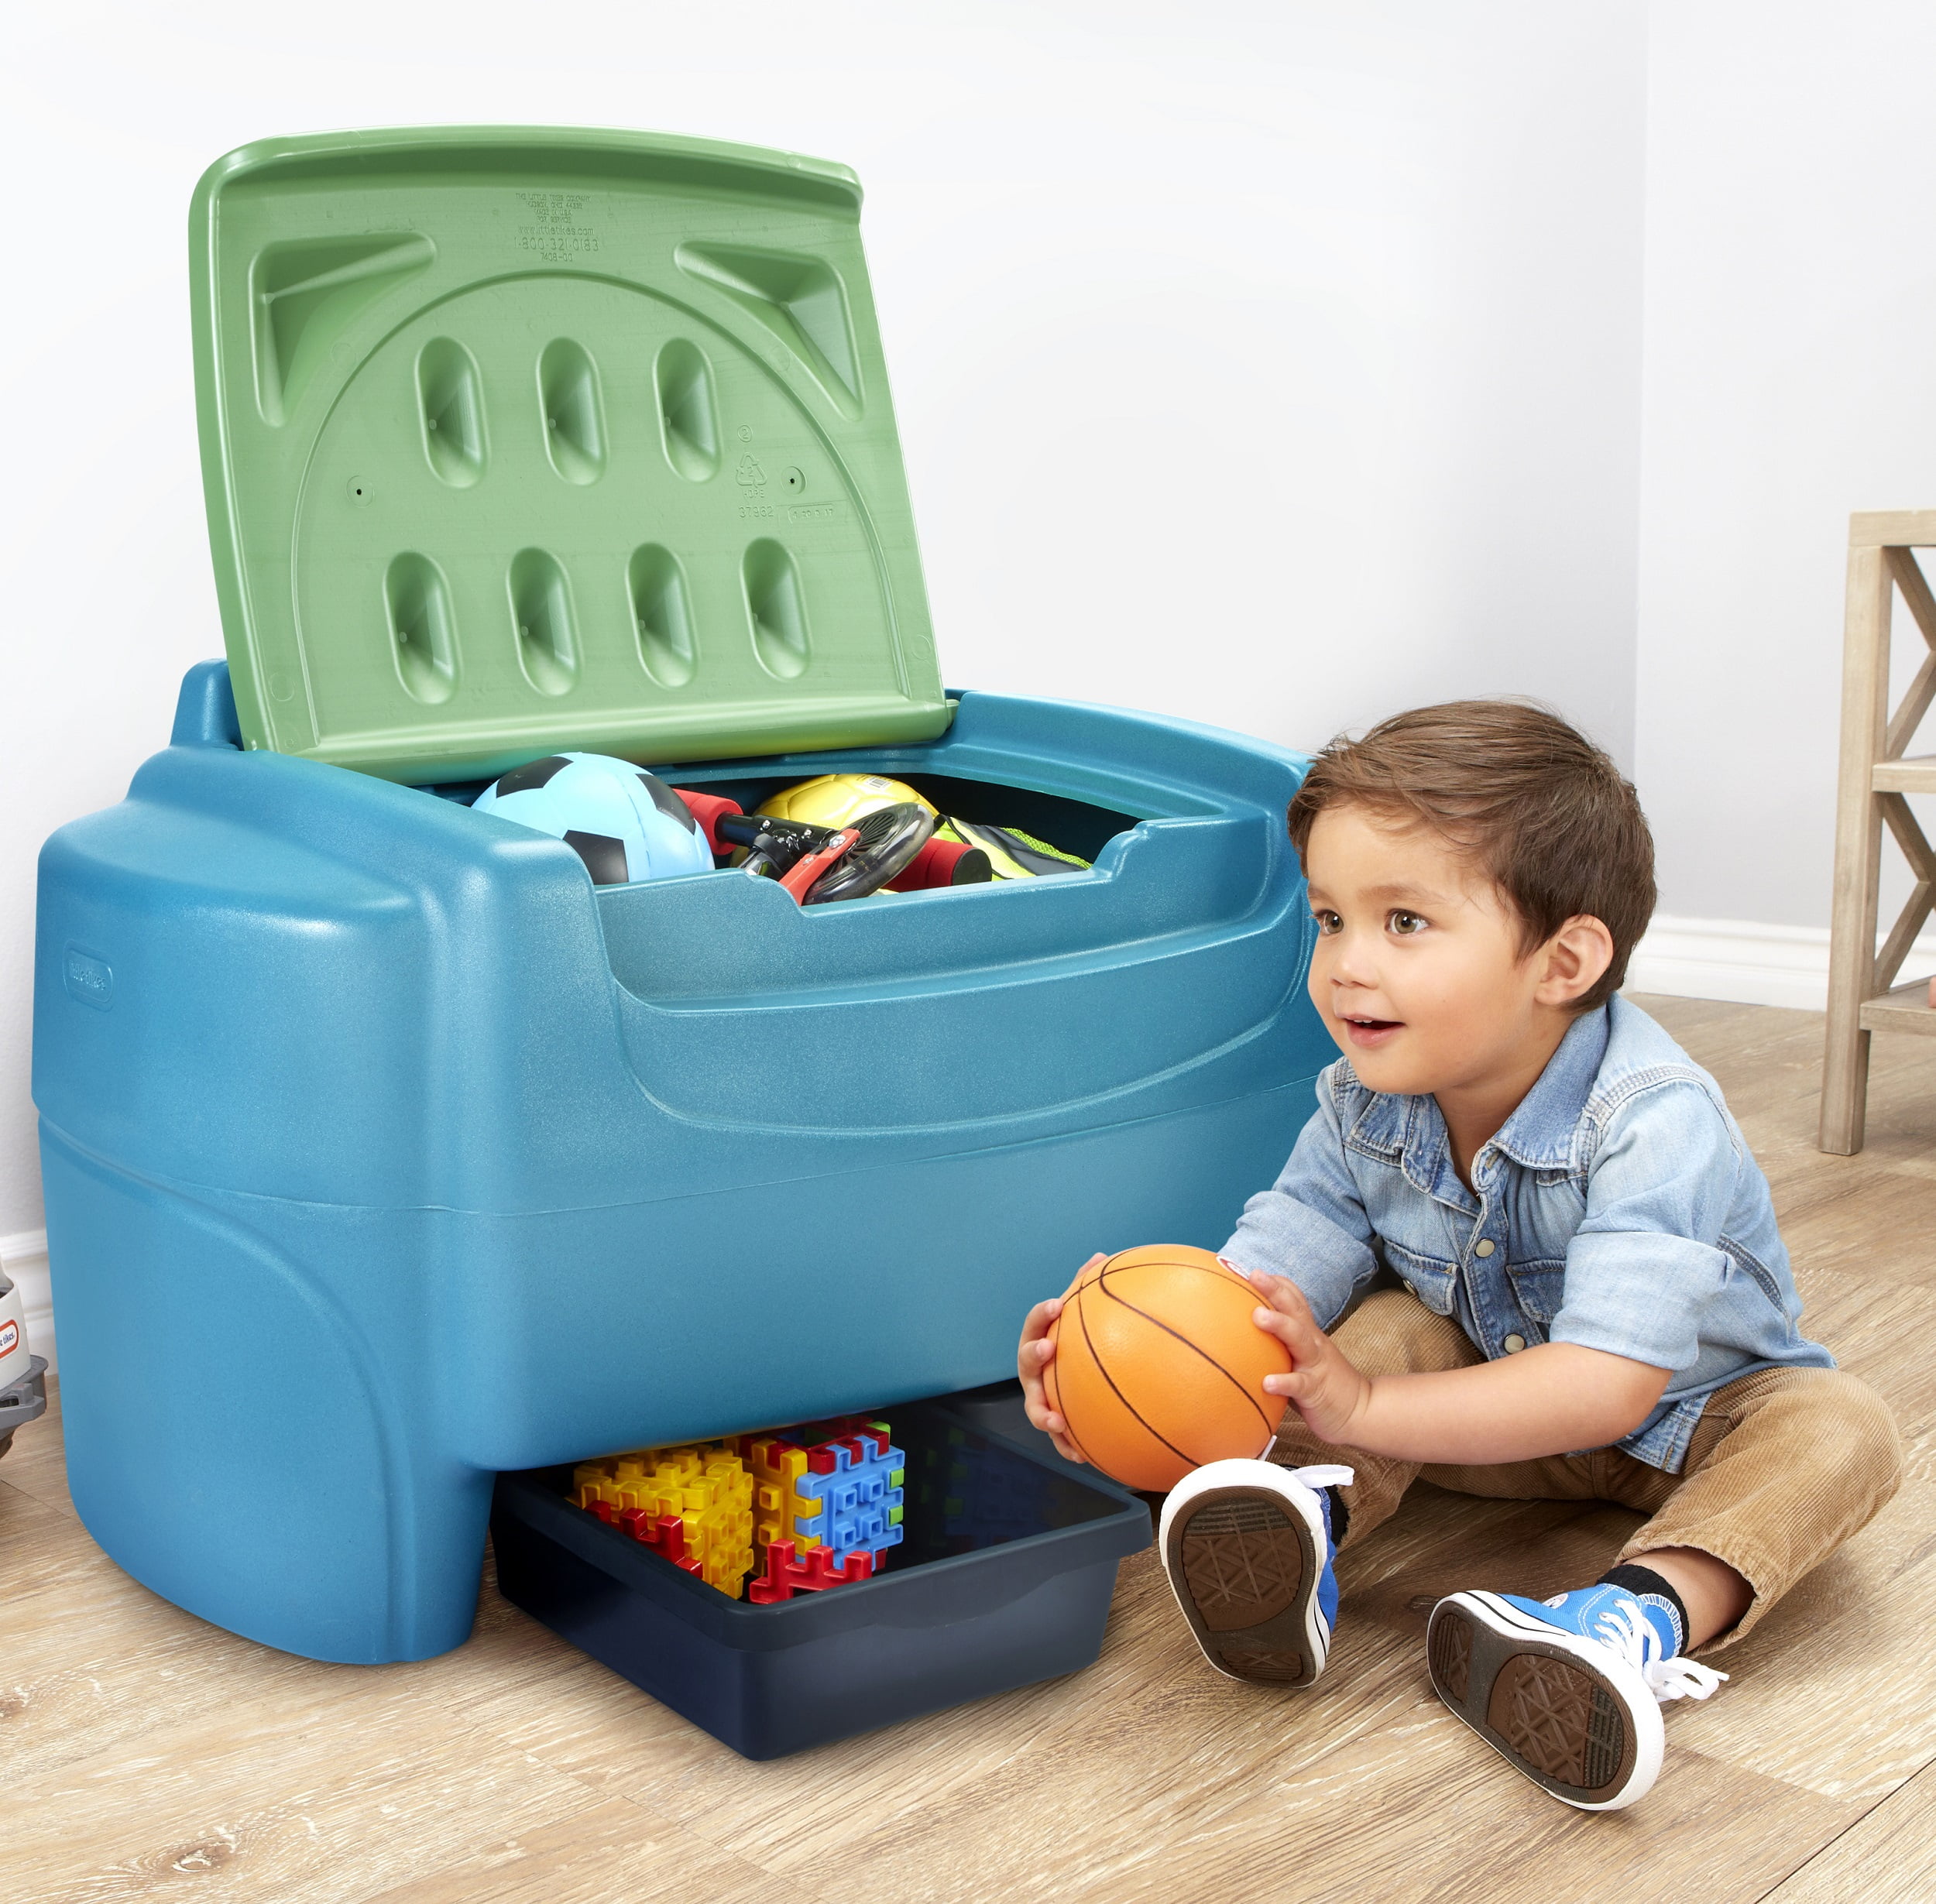 Clear the clutter with the Little Tikes Primary Colors Toy Chest for $34  (Reg. $60)